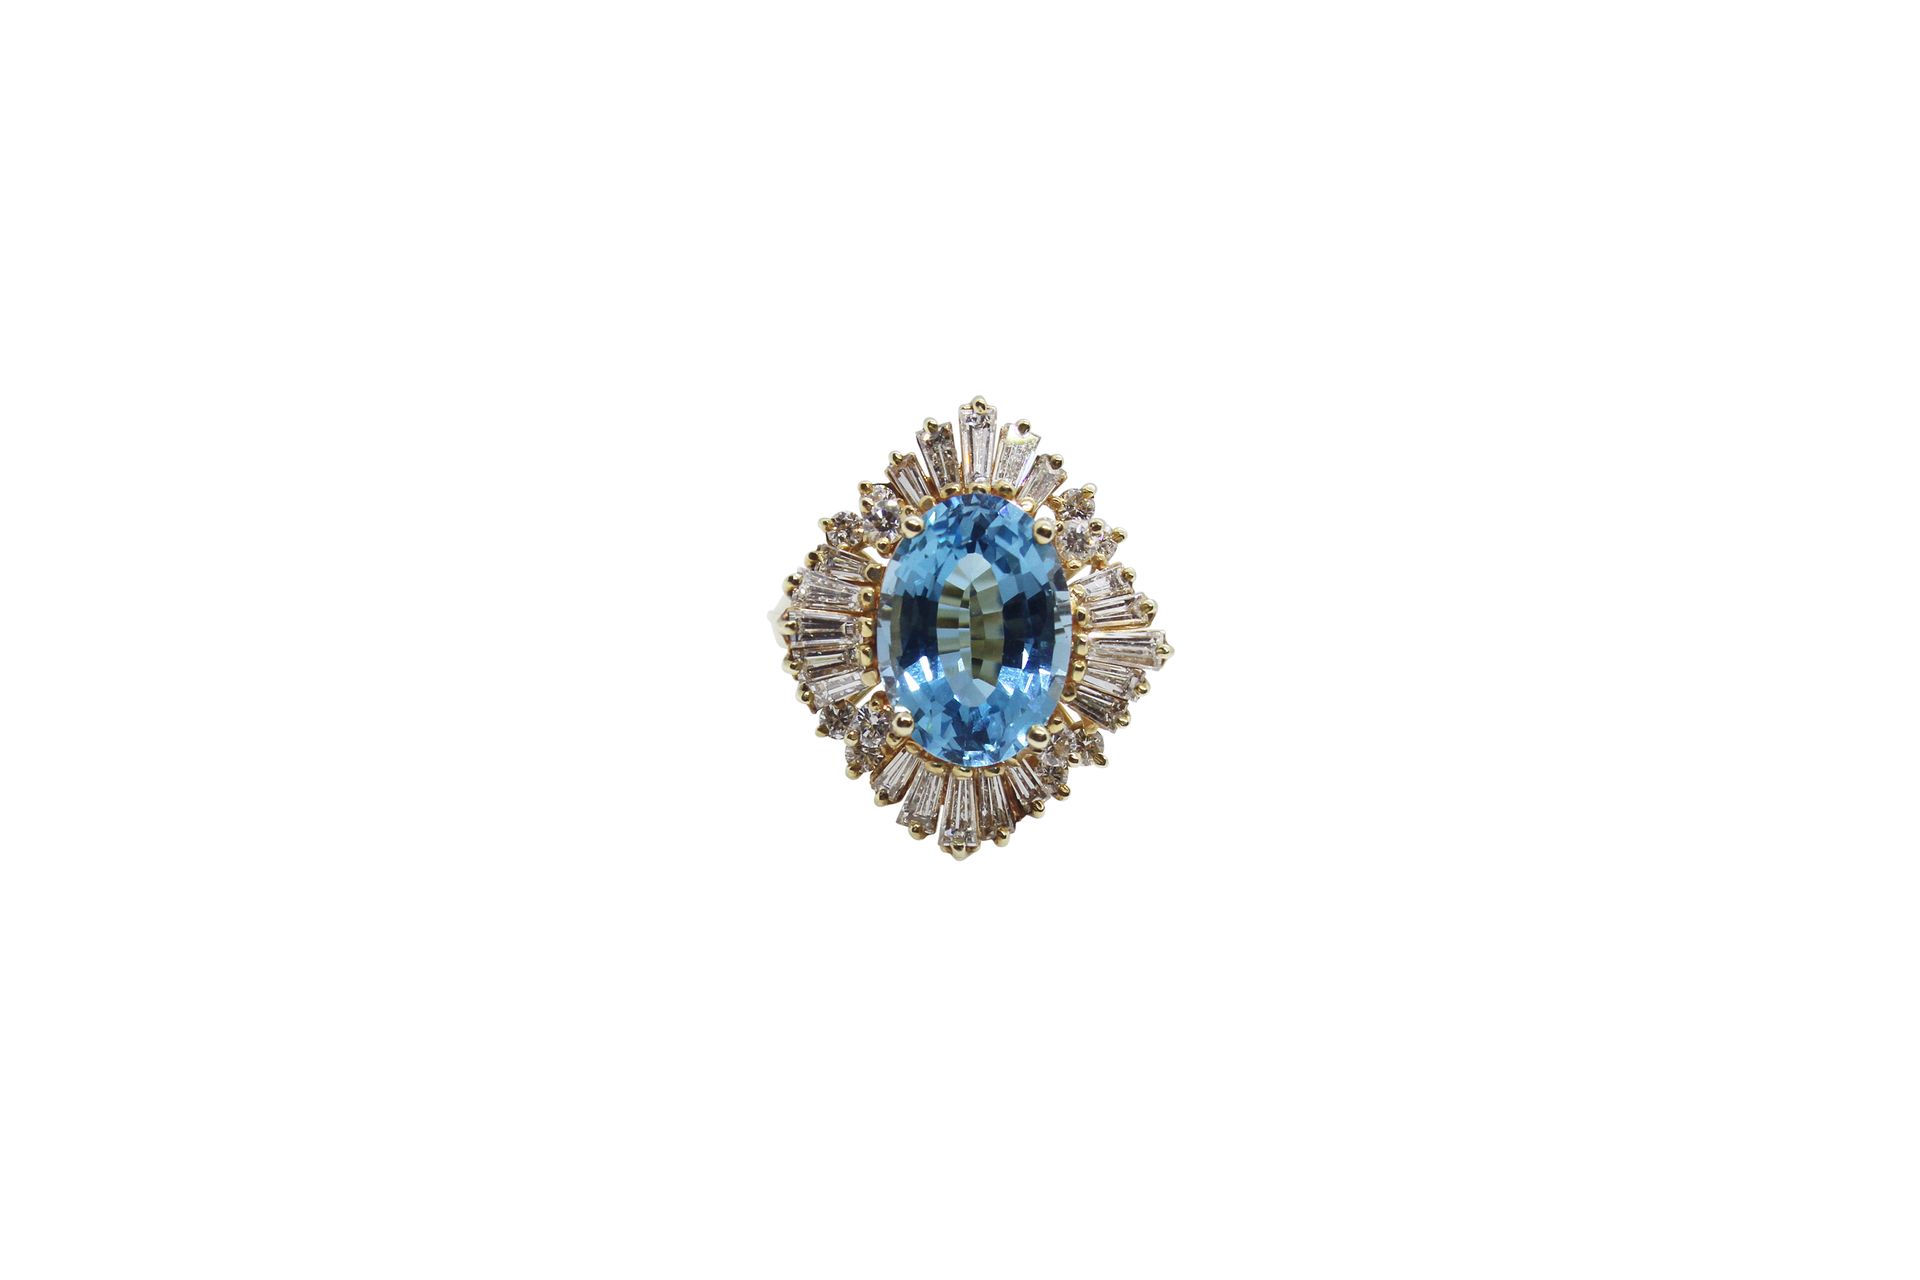 18k gold ring set with blue topaz and diamonds 18k gold ring set with blue topaz&hellip;